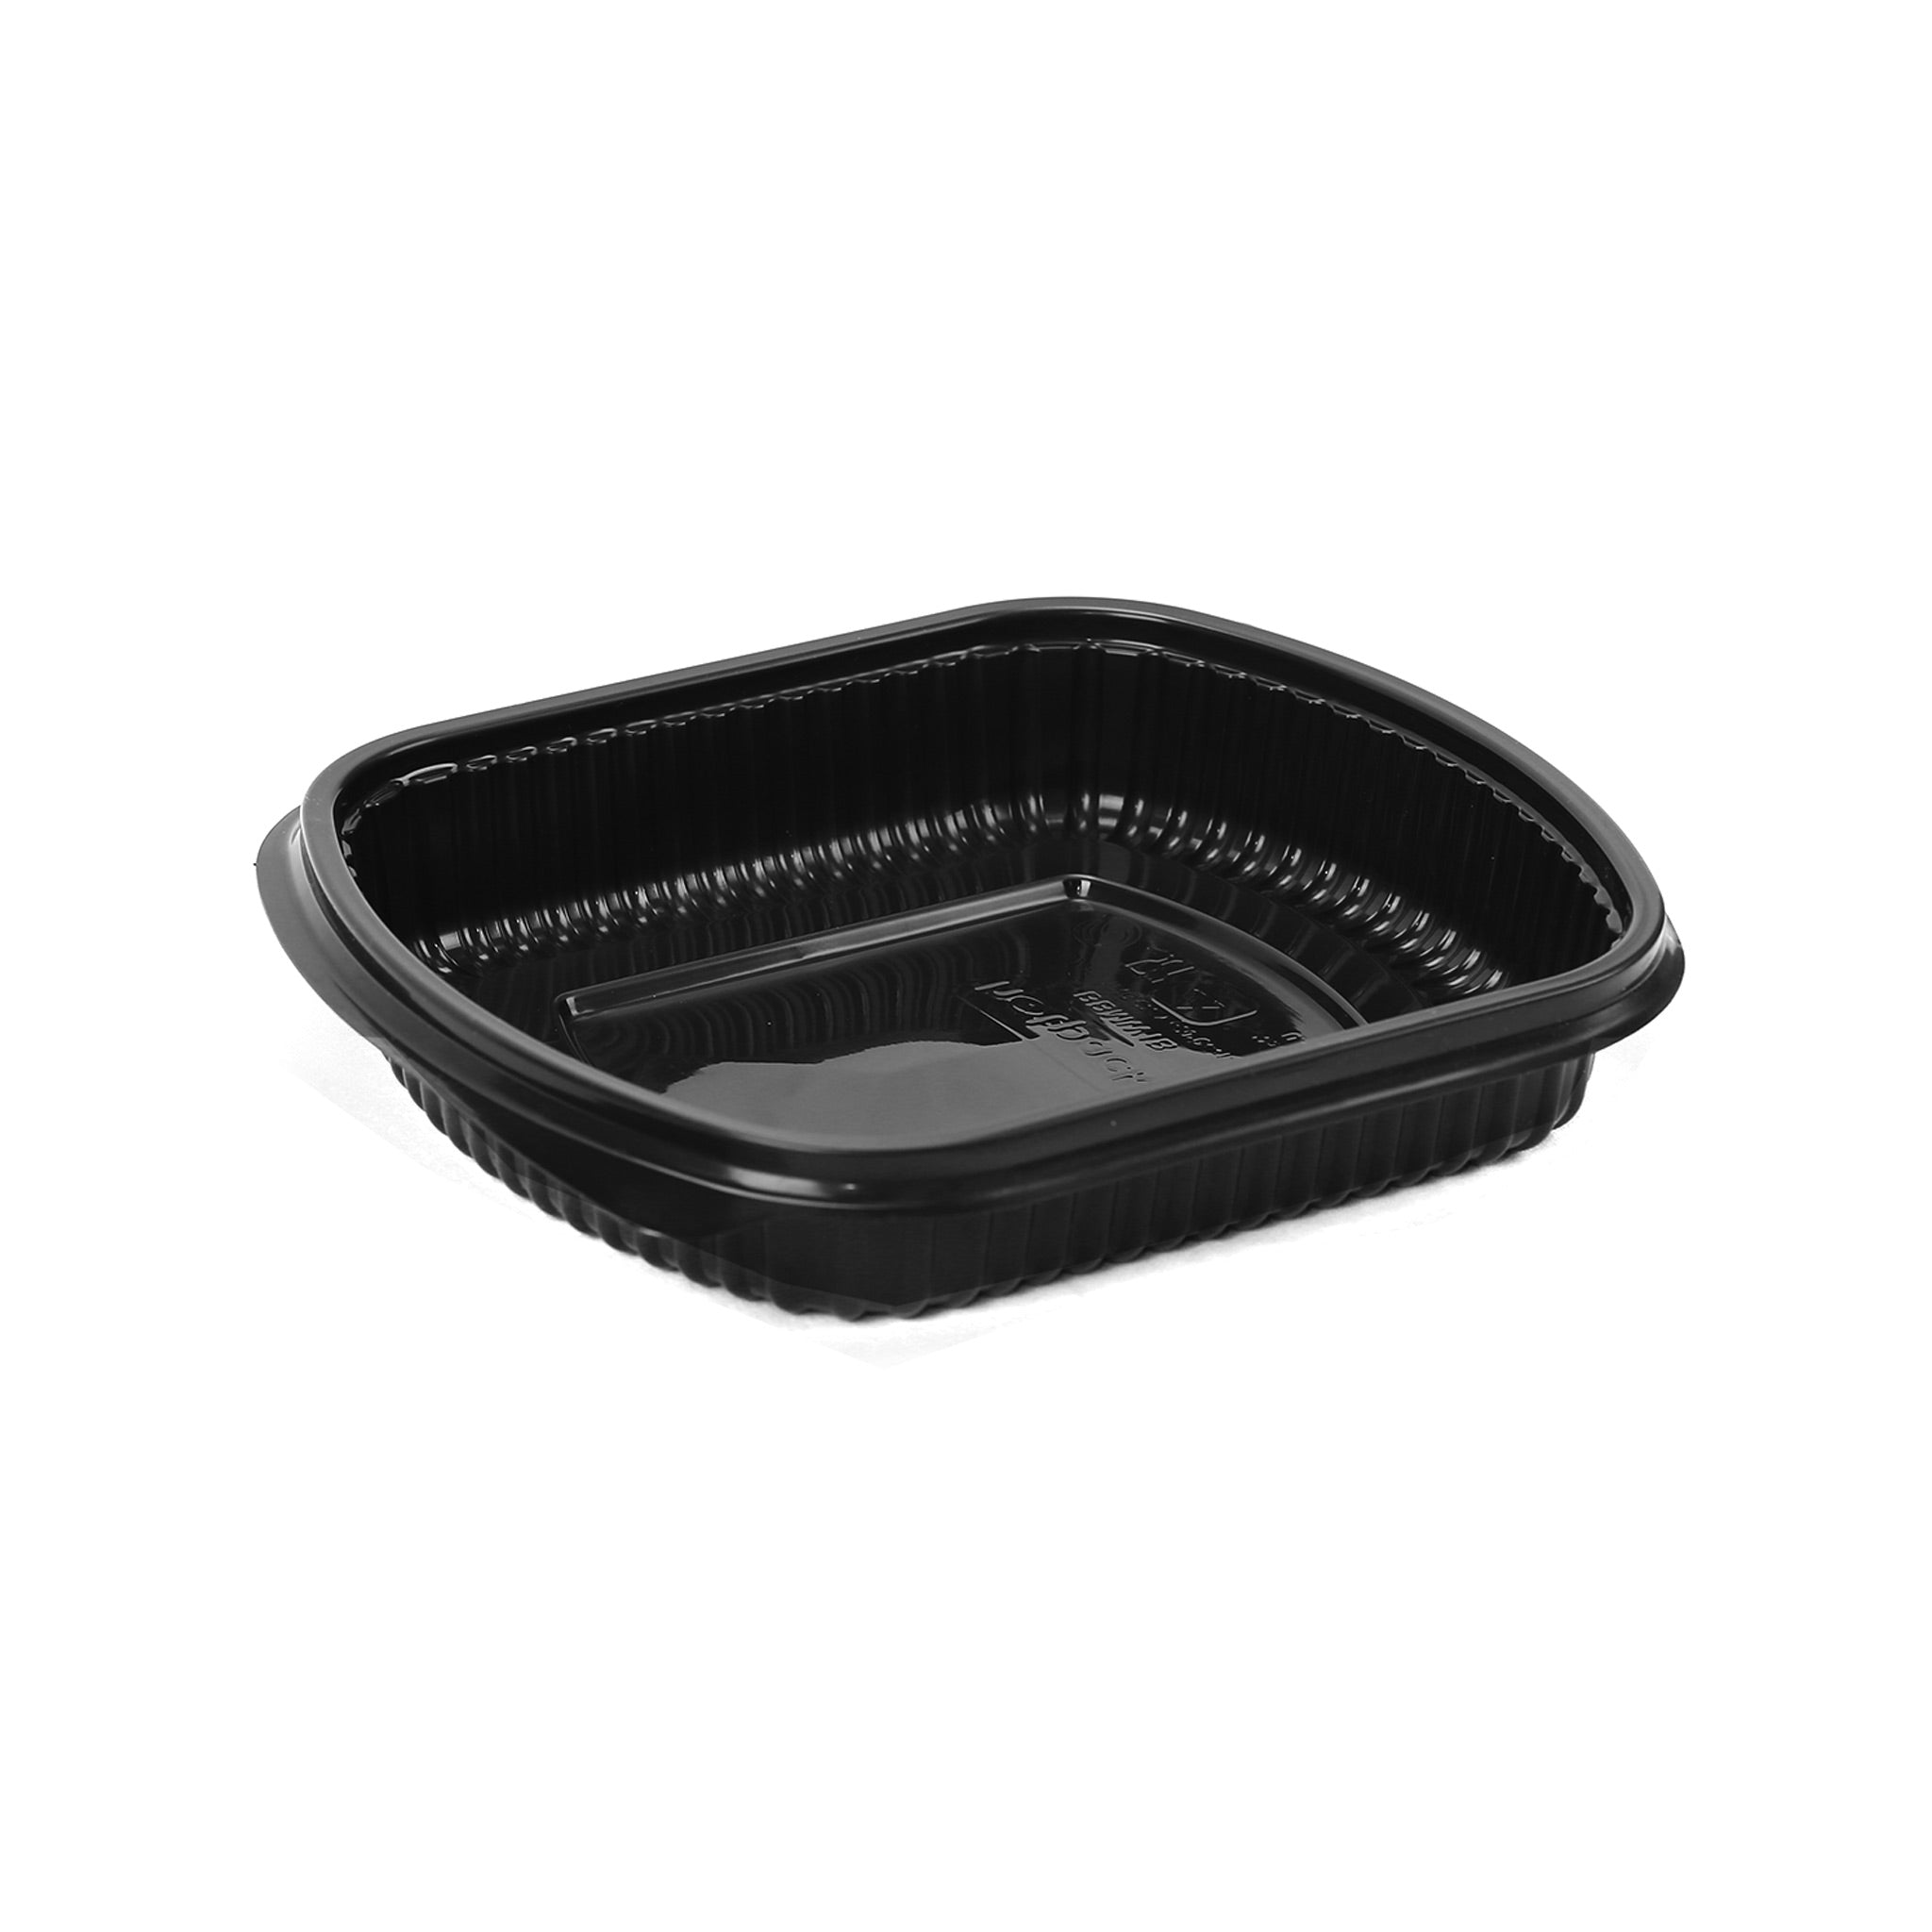 250 Pieces Black Base Rectangular 1-Compartment Container Base + Lid